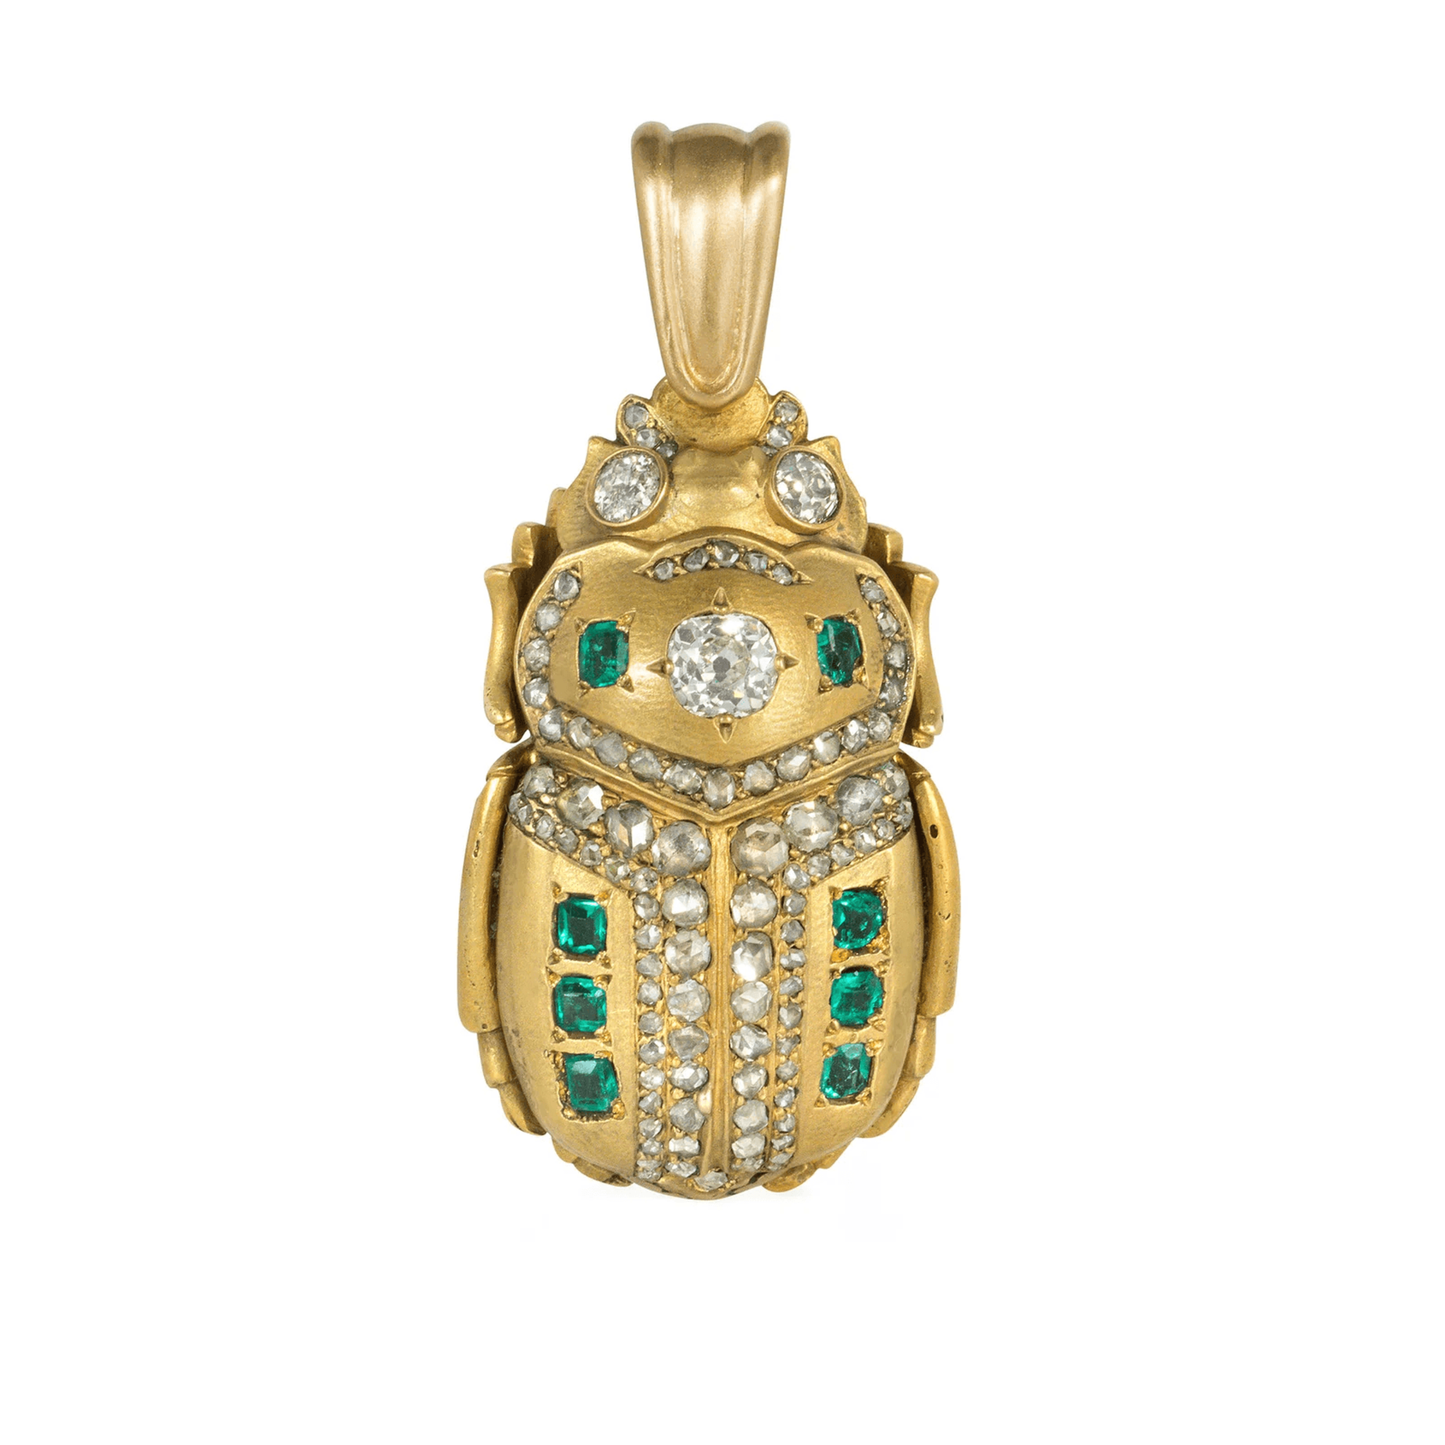 Antique Egyptian Revival 18KT Yellow Gold Diamond & Emerald Scarab Pendant/Brooch front